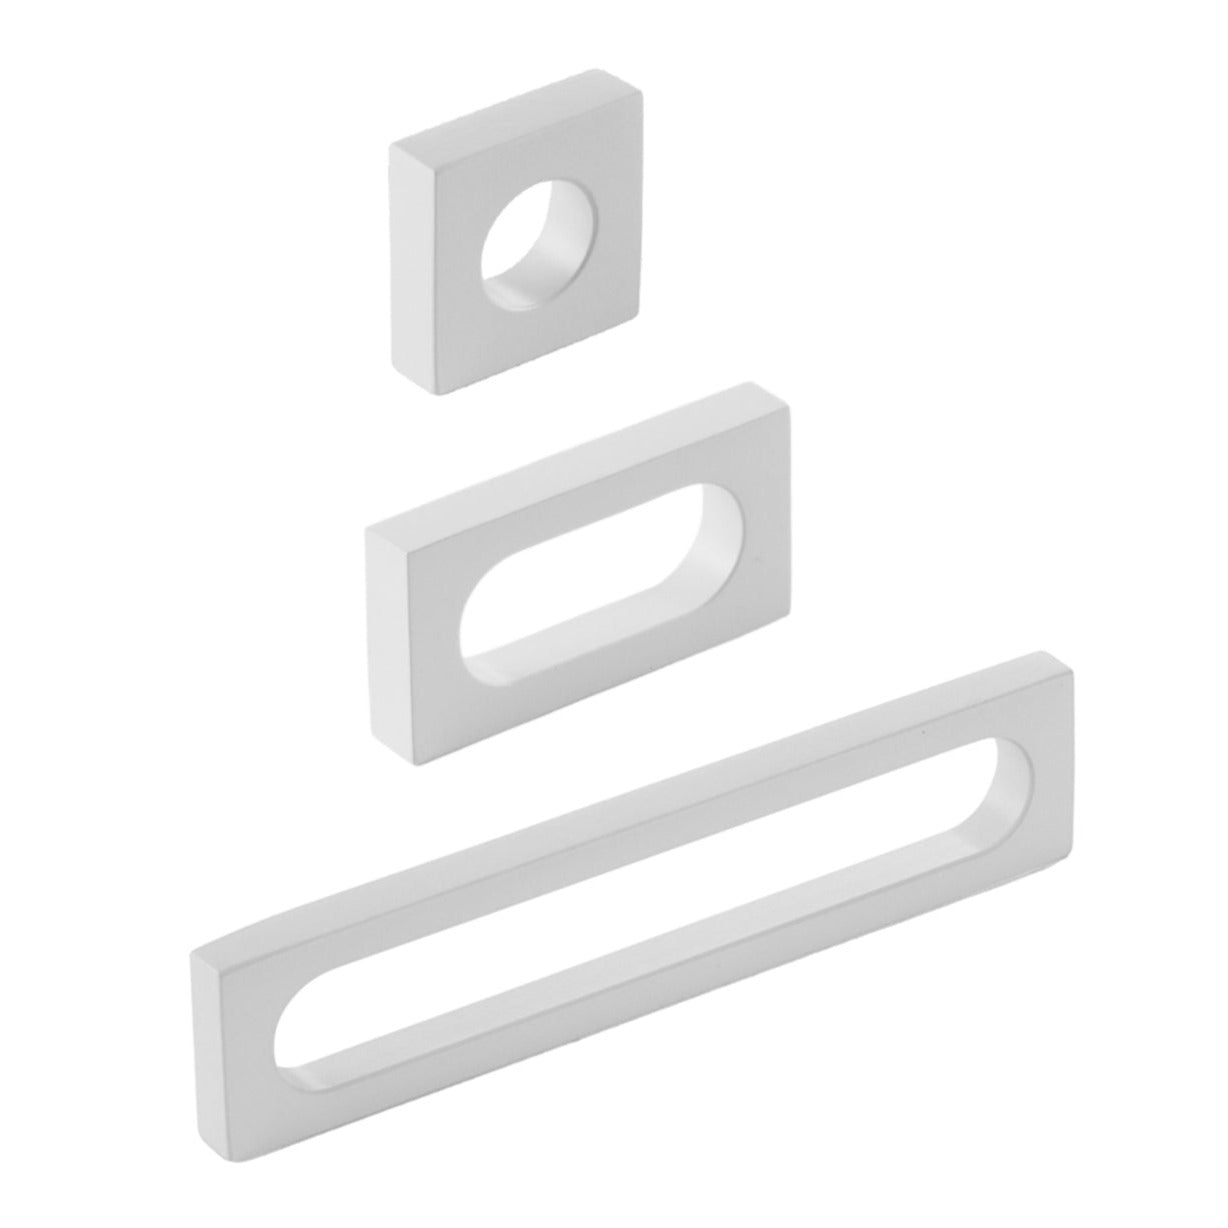 Matte White "Loop" Square Drawer Pulls and Cabinet Knobs